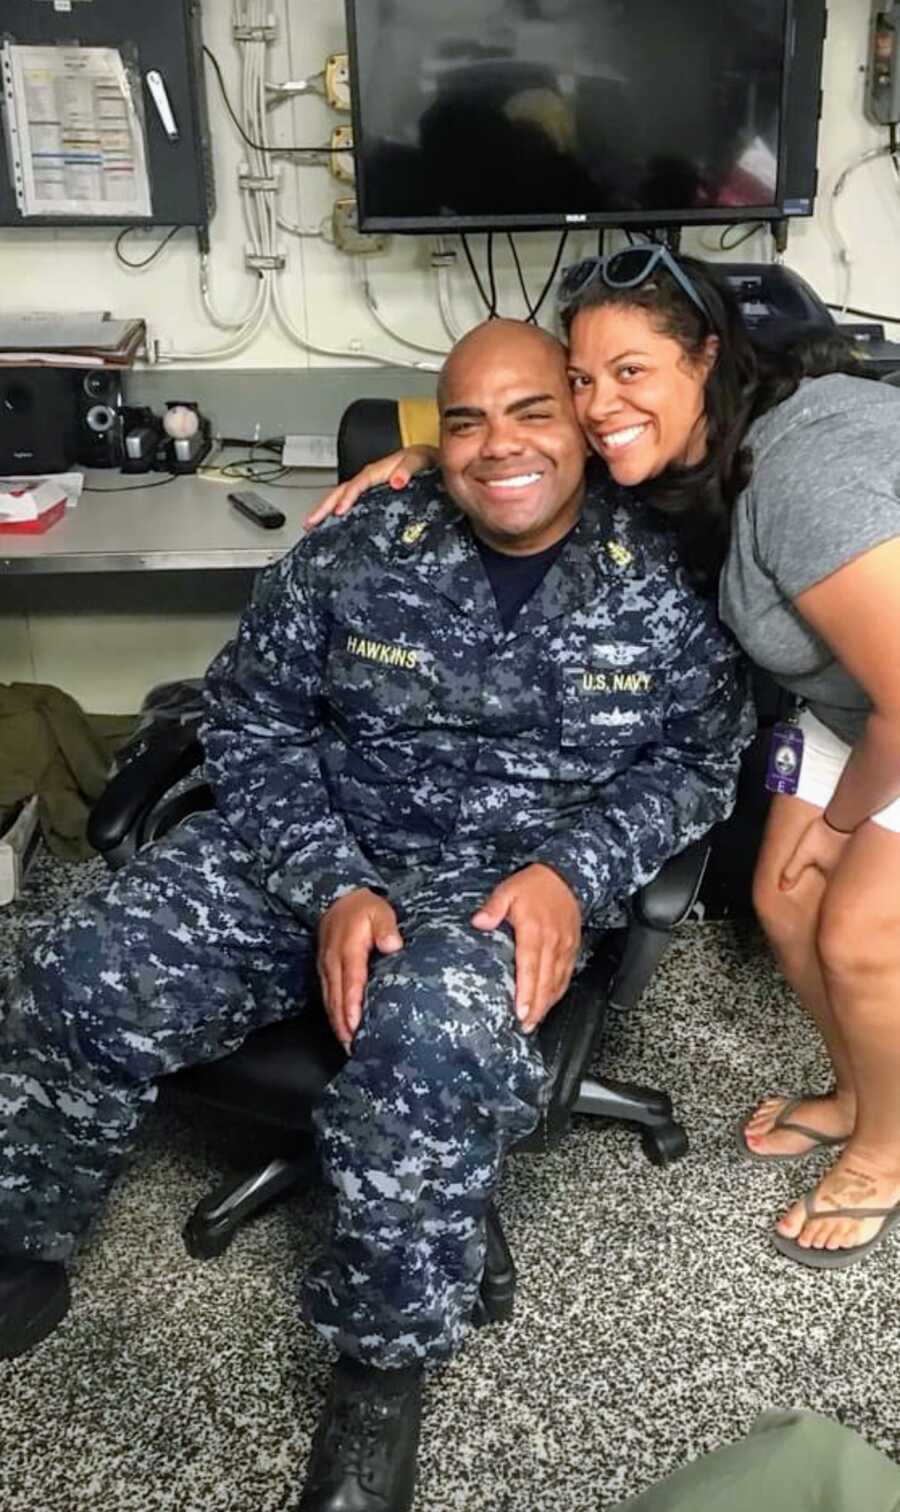 military couple poses together, both smiling